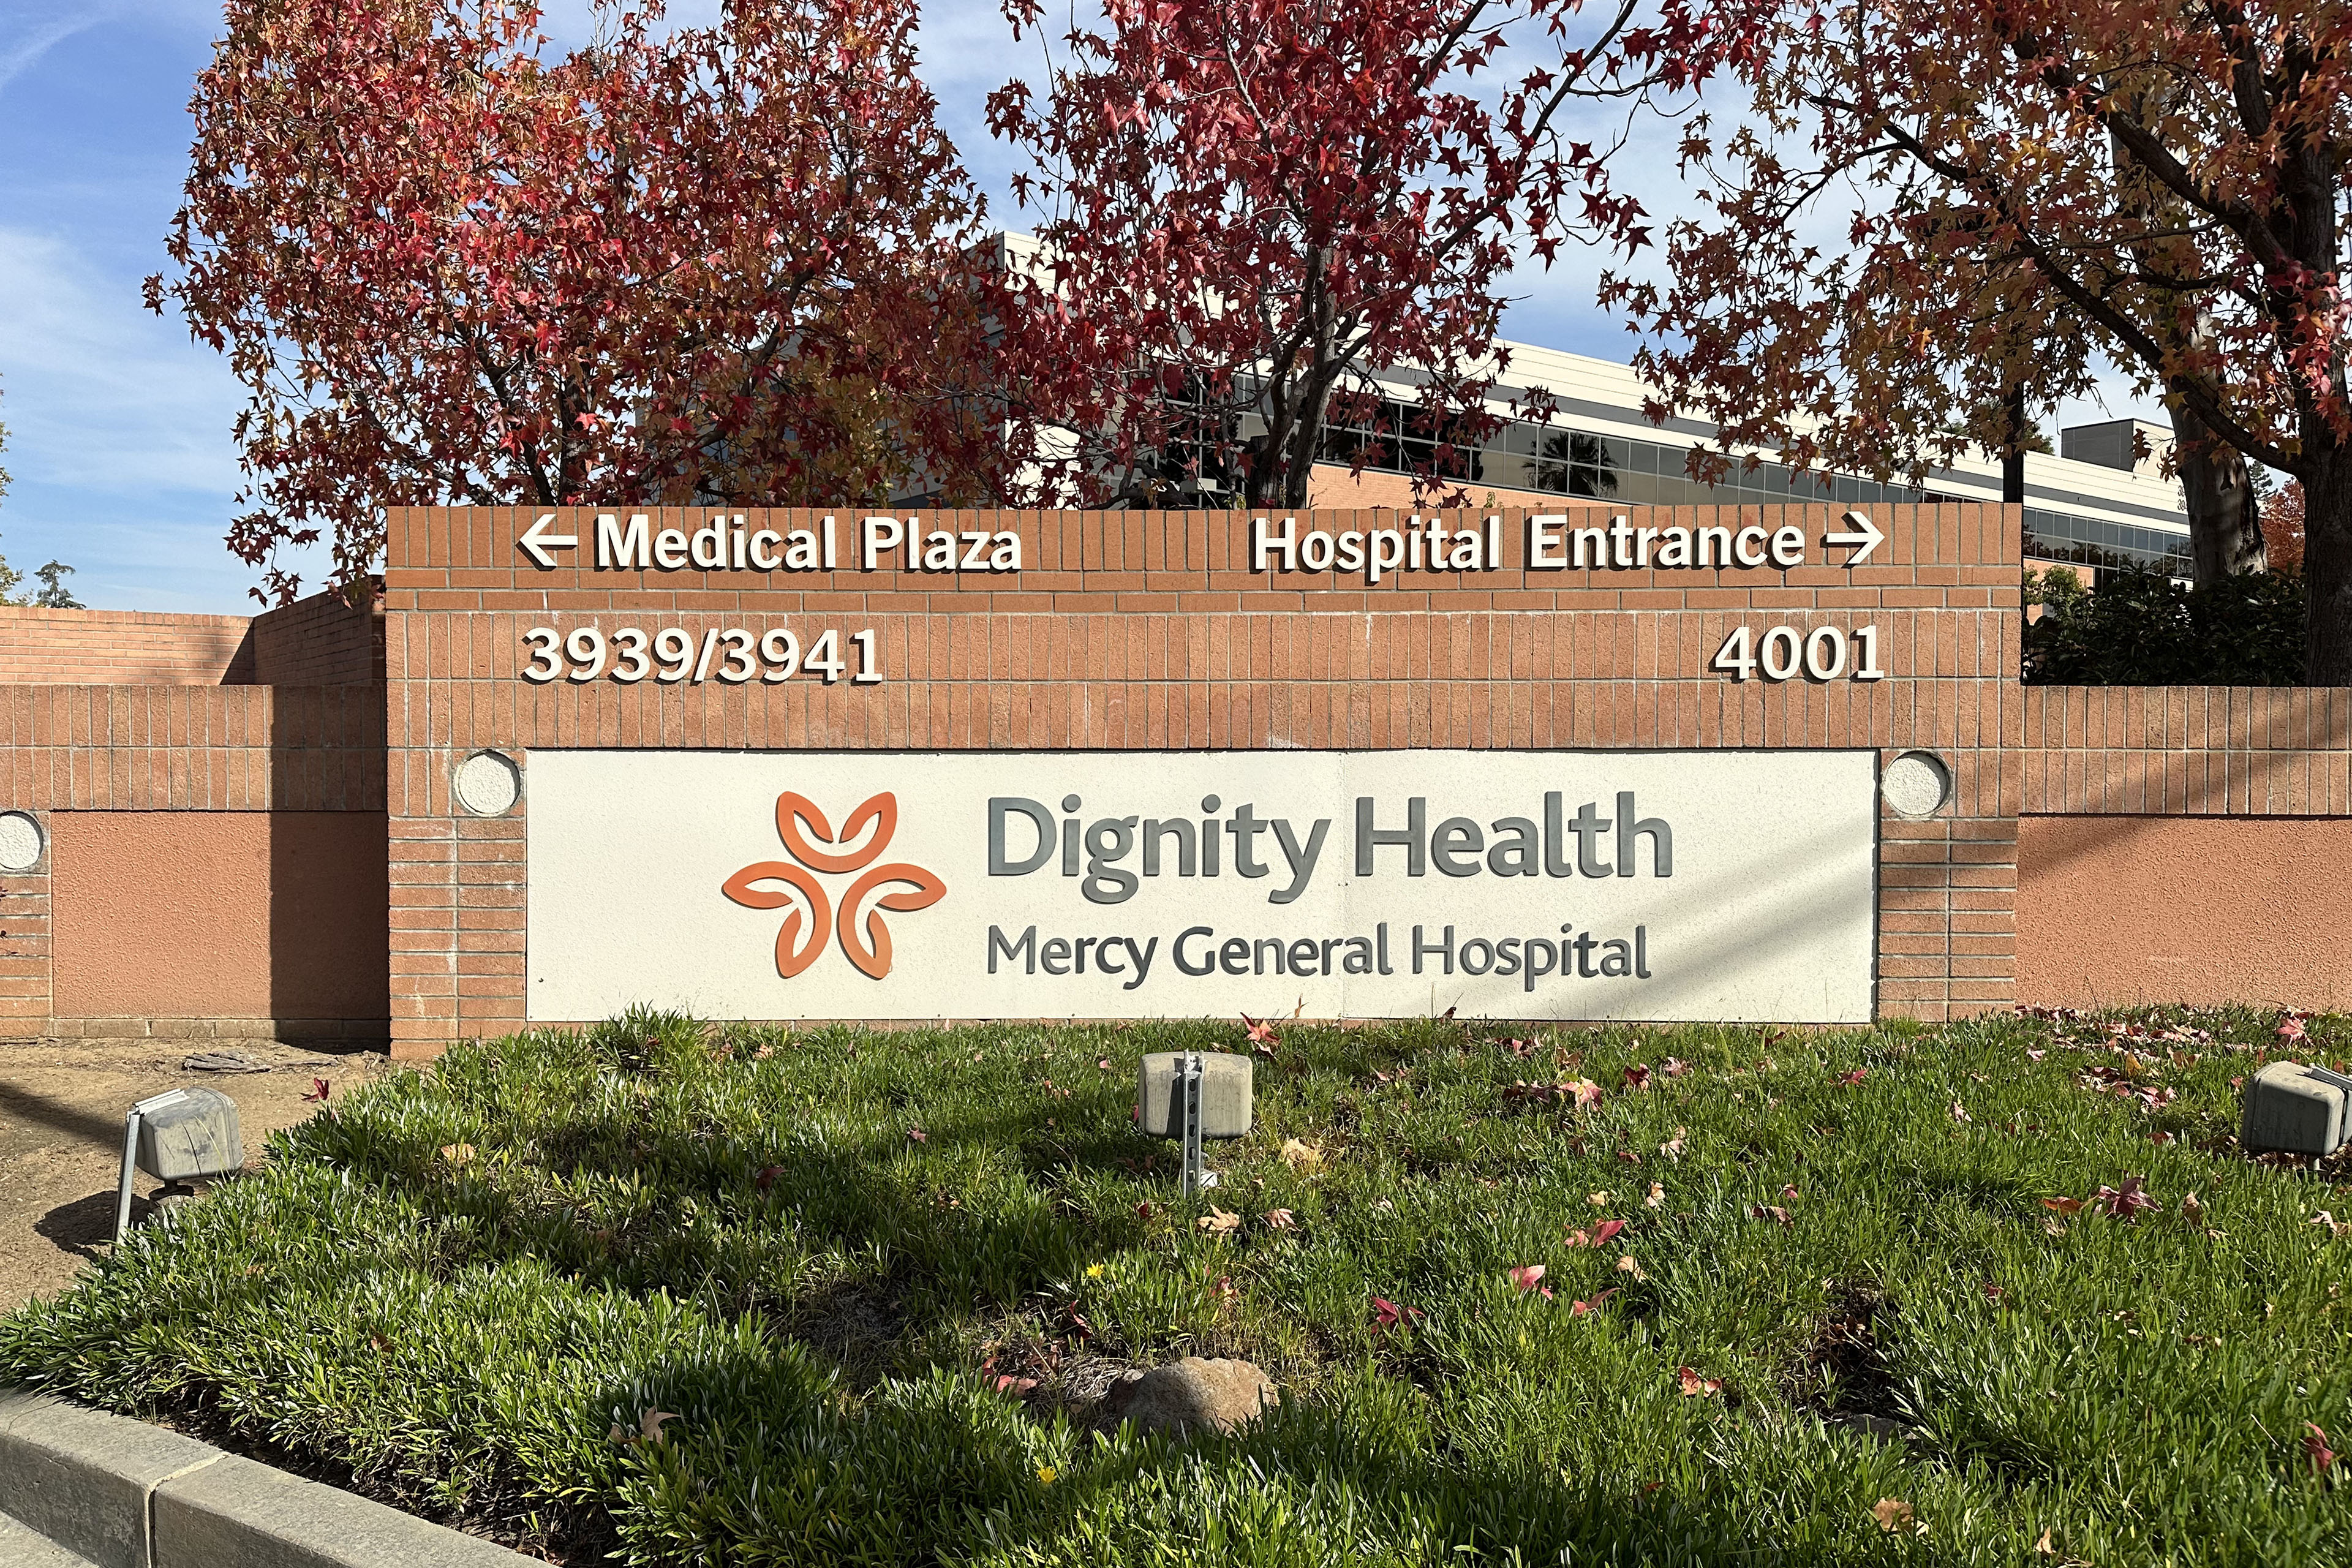 A photo showing the brick entryway sign for Mercy General Hospital, which is run by Dignity Health.